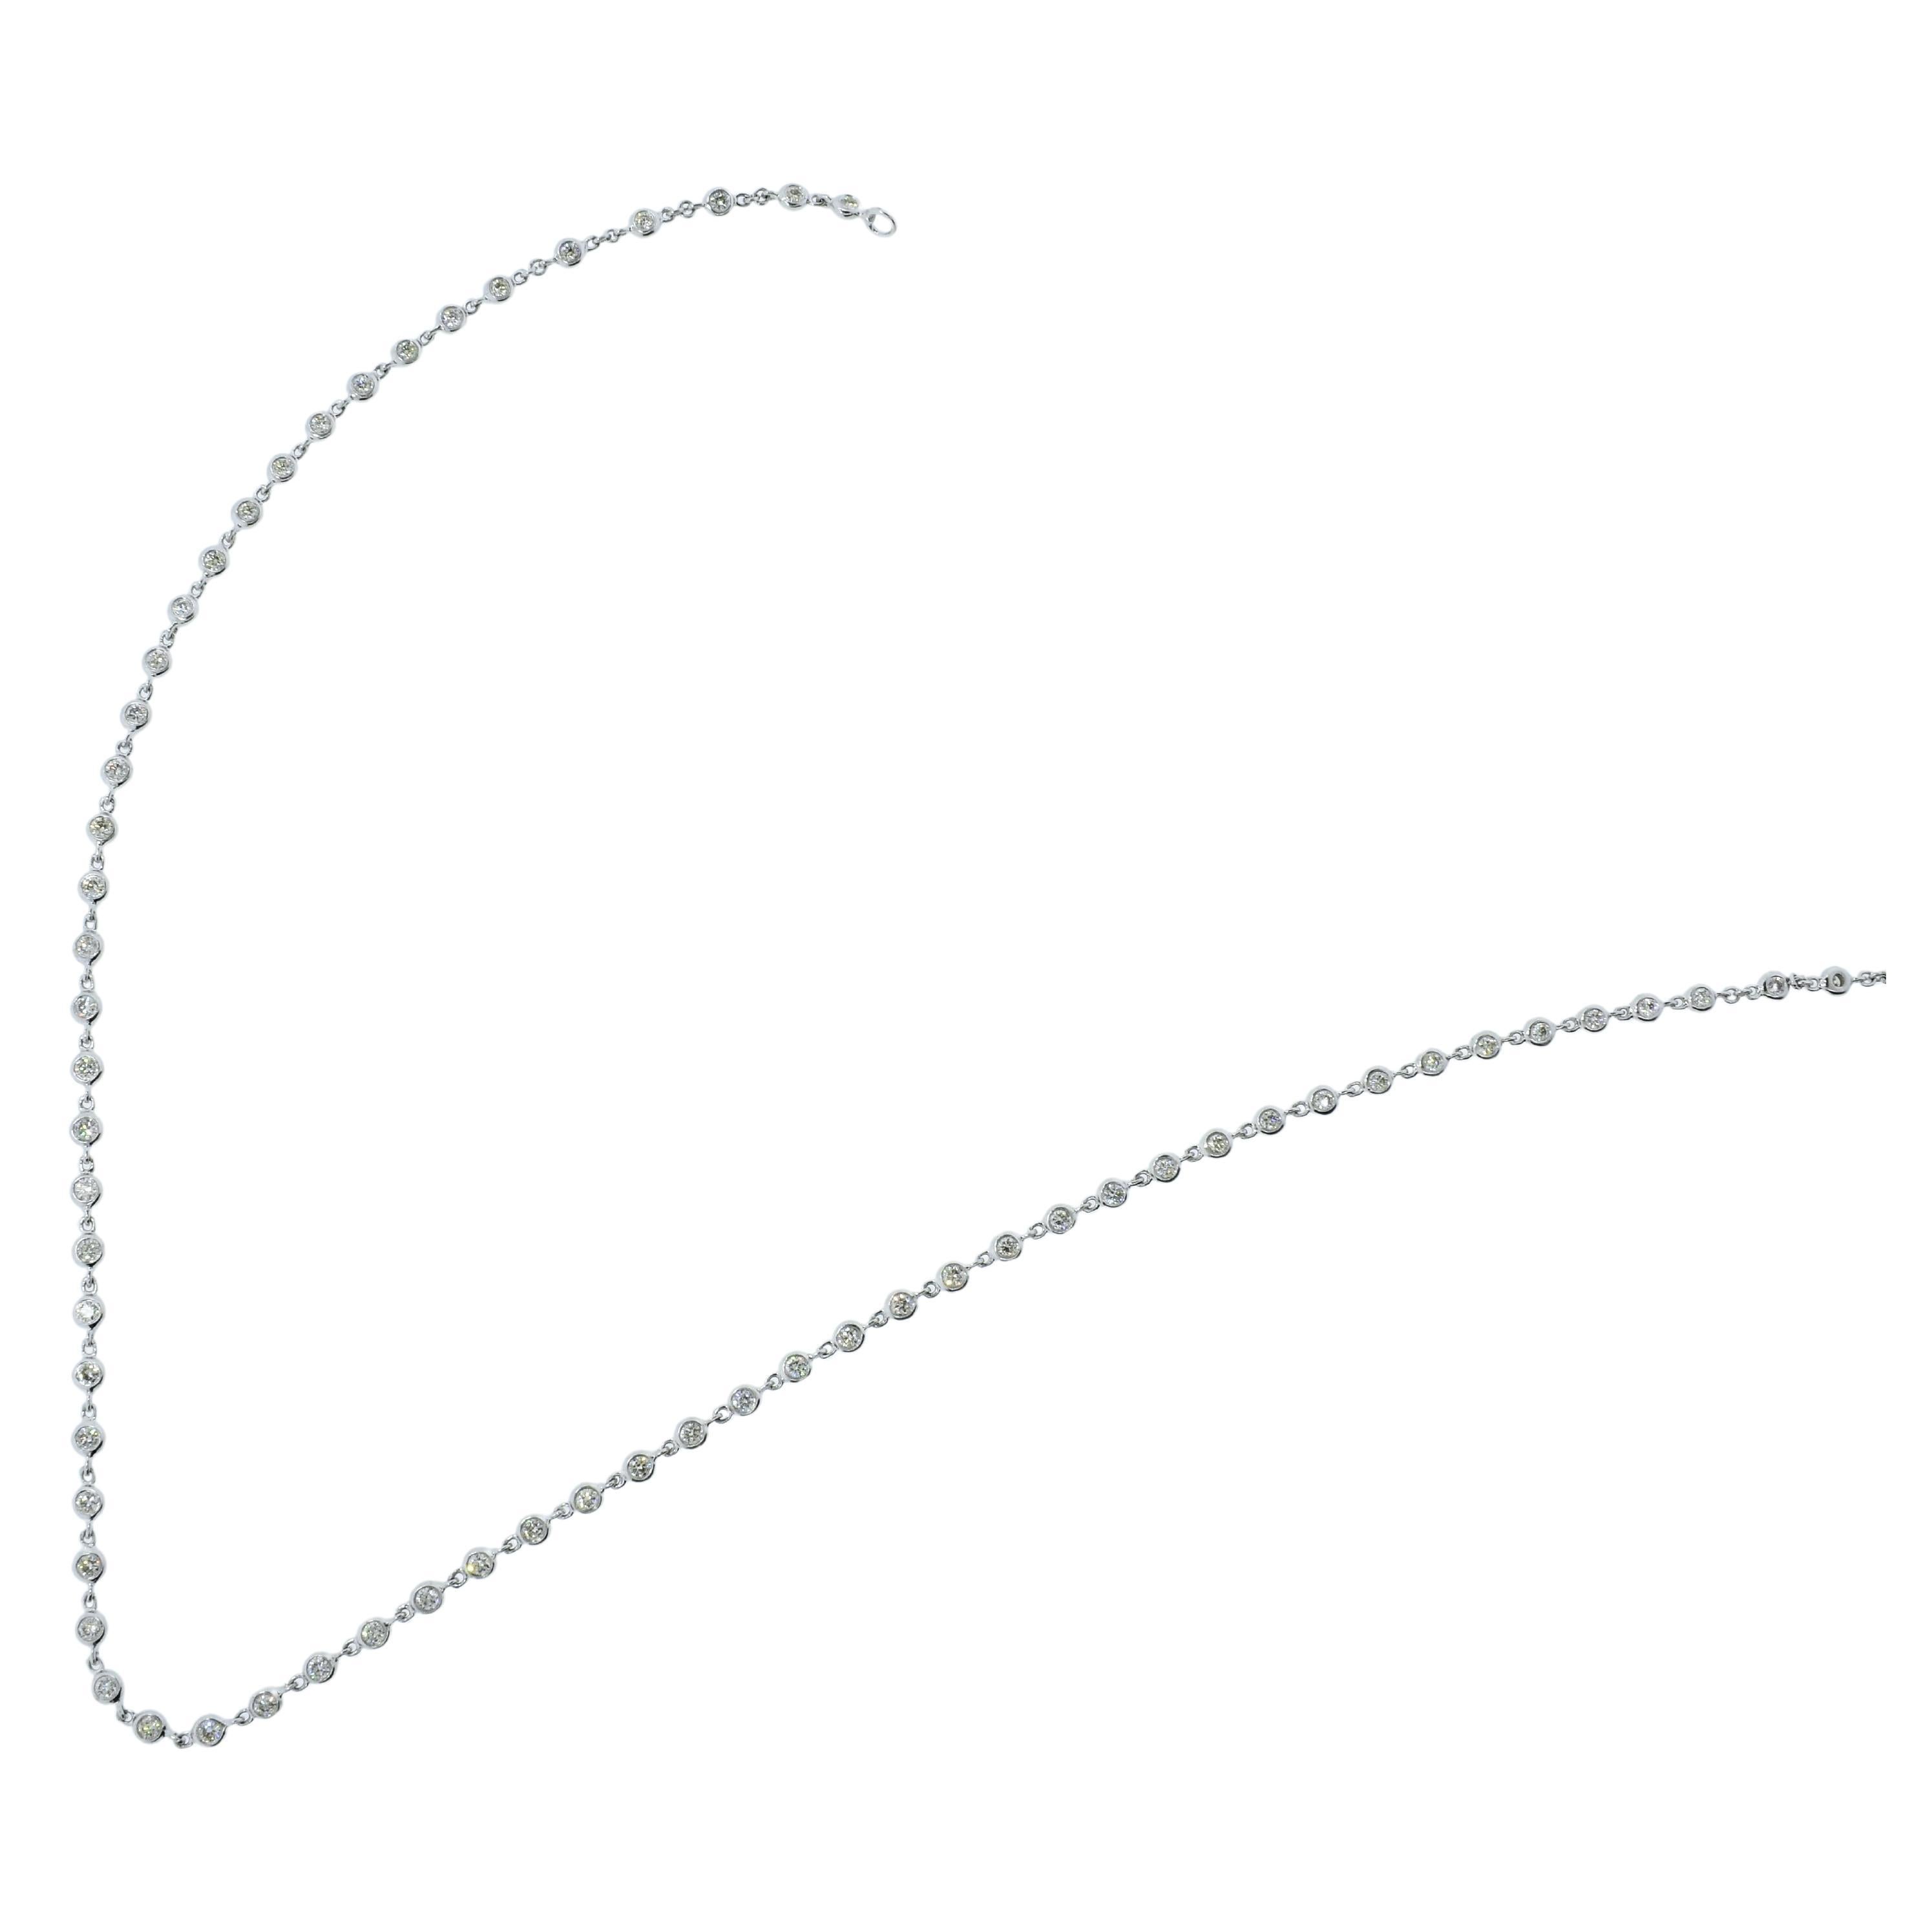 18K White Gold Diamond Necklace Chain with 2.02 cts. of Fine Diamonds